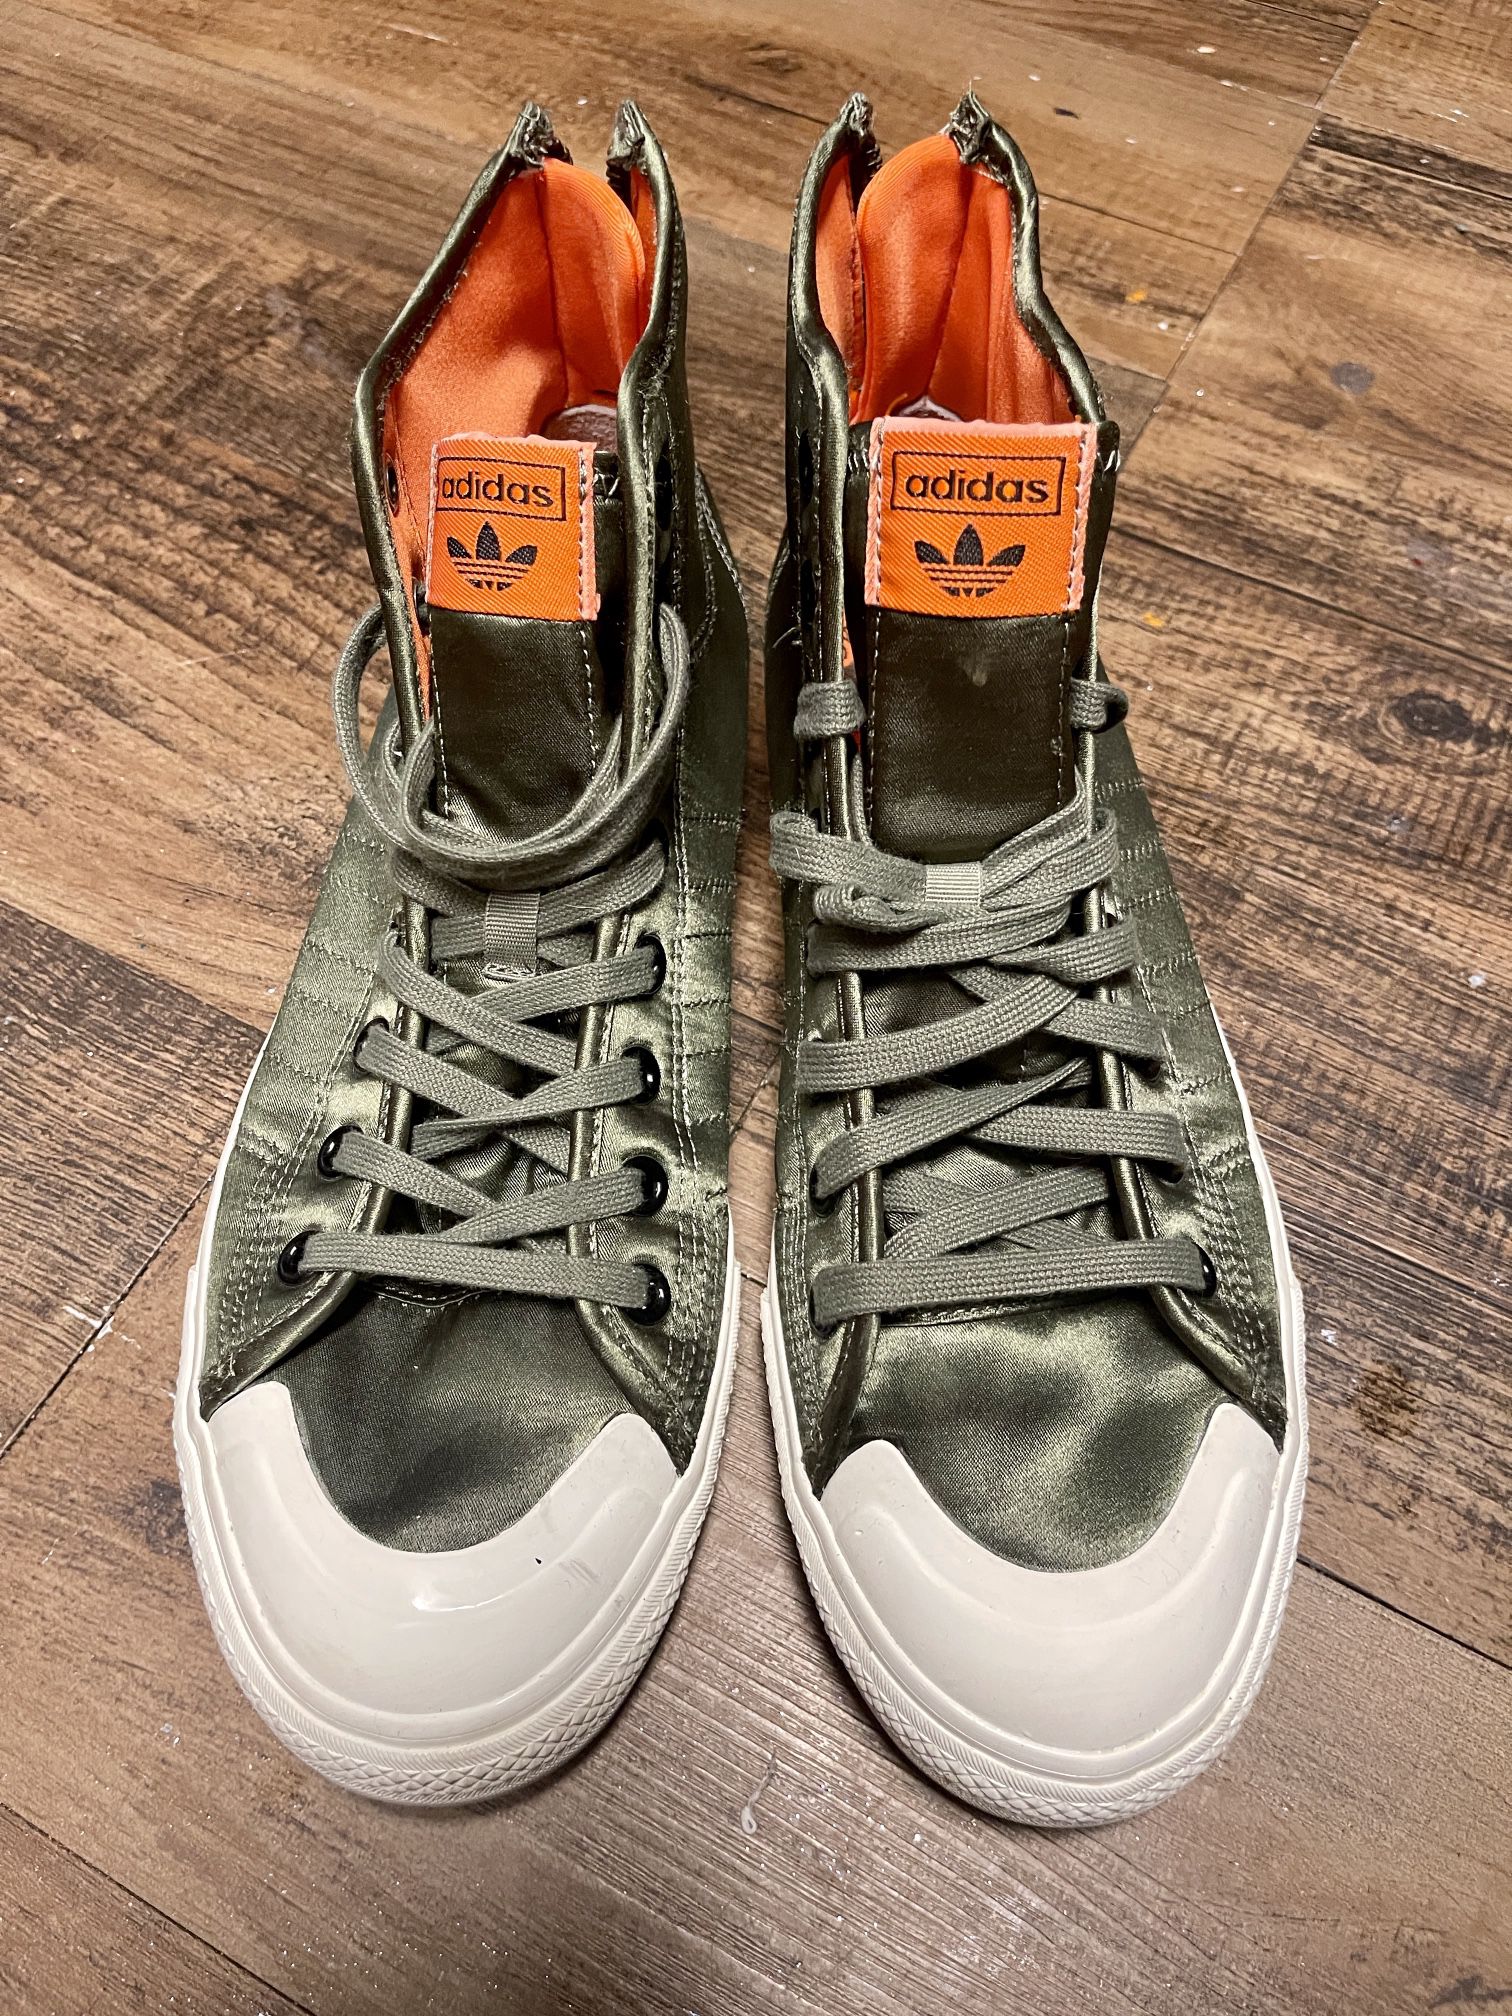 Adidas Originals Men's Olive/Black Size 10.5, Style LVL 029002 Used normal  in good condition. for Sale in E Rncho Dmngz, CA - OfferUp